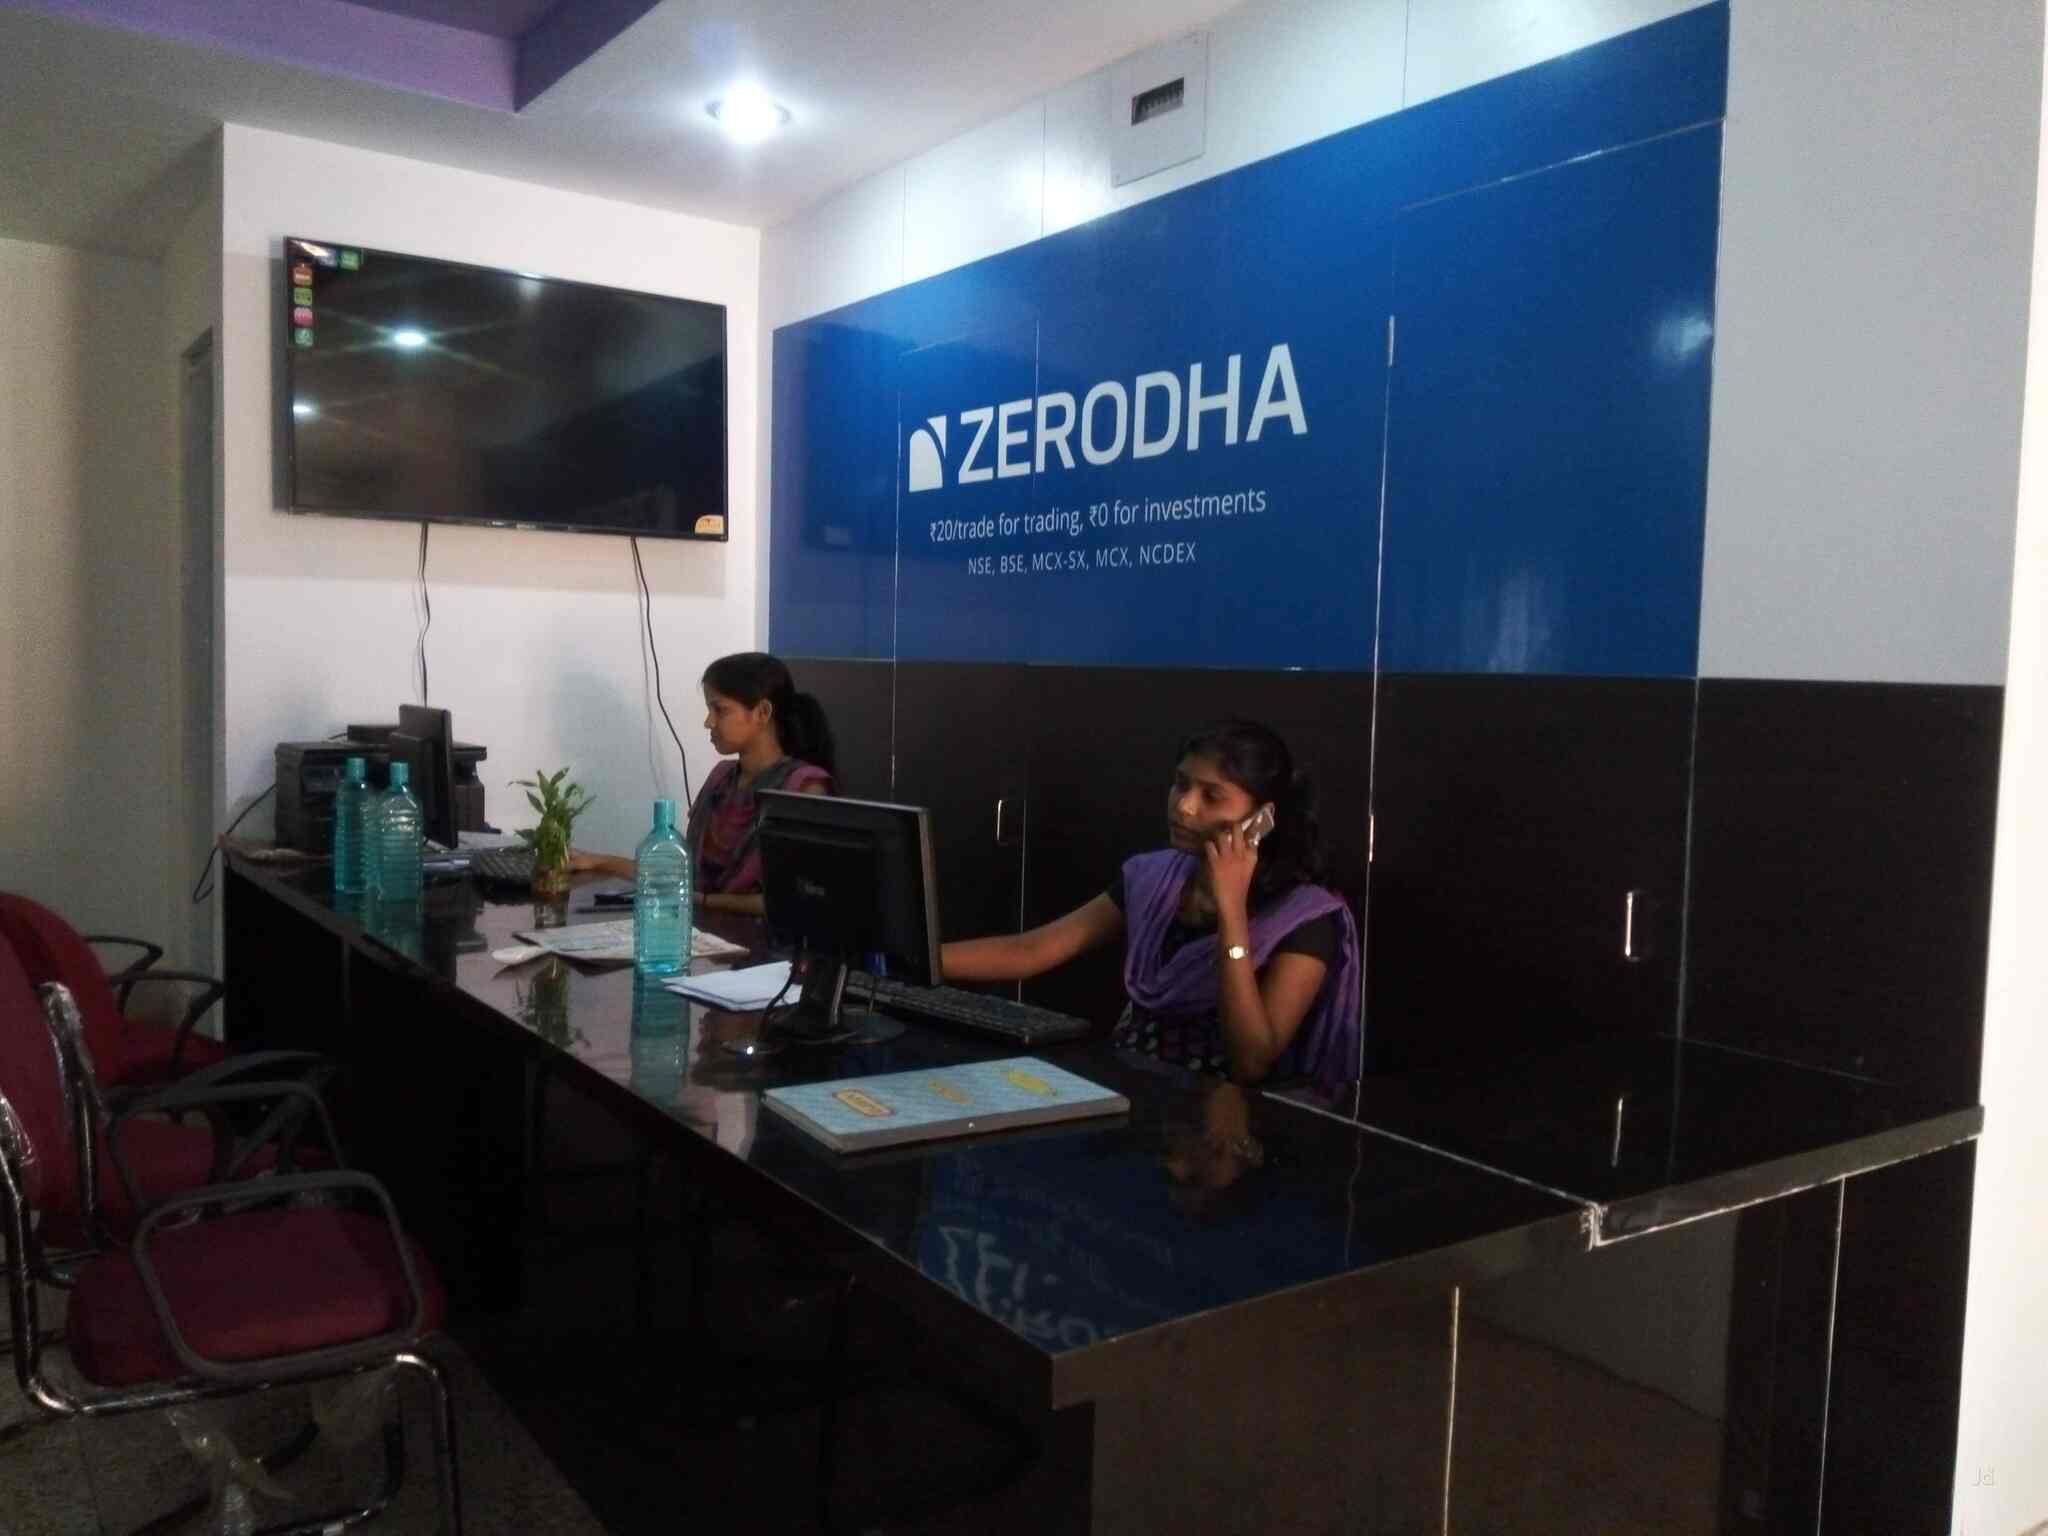 Nithin Kamath, co-founder, and CEO of Bengaluru-based financial services firm Zerodha has announced a health campaign in which anyone who meets a defined target on 90% of days over the next year would receive a bonus. Zerodha, a financial services company that had urged its staff to focus on their health during the 2020 Covid epidemic, has now made fitness a routine.
